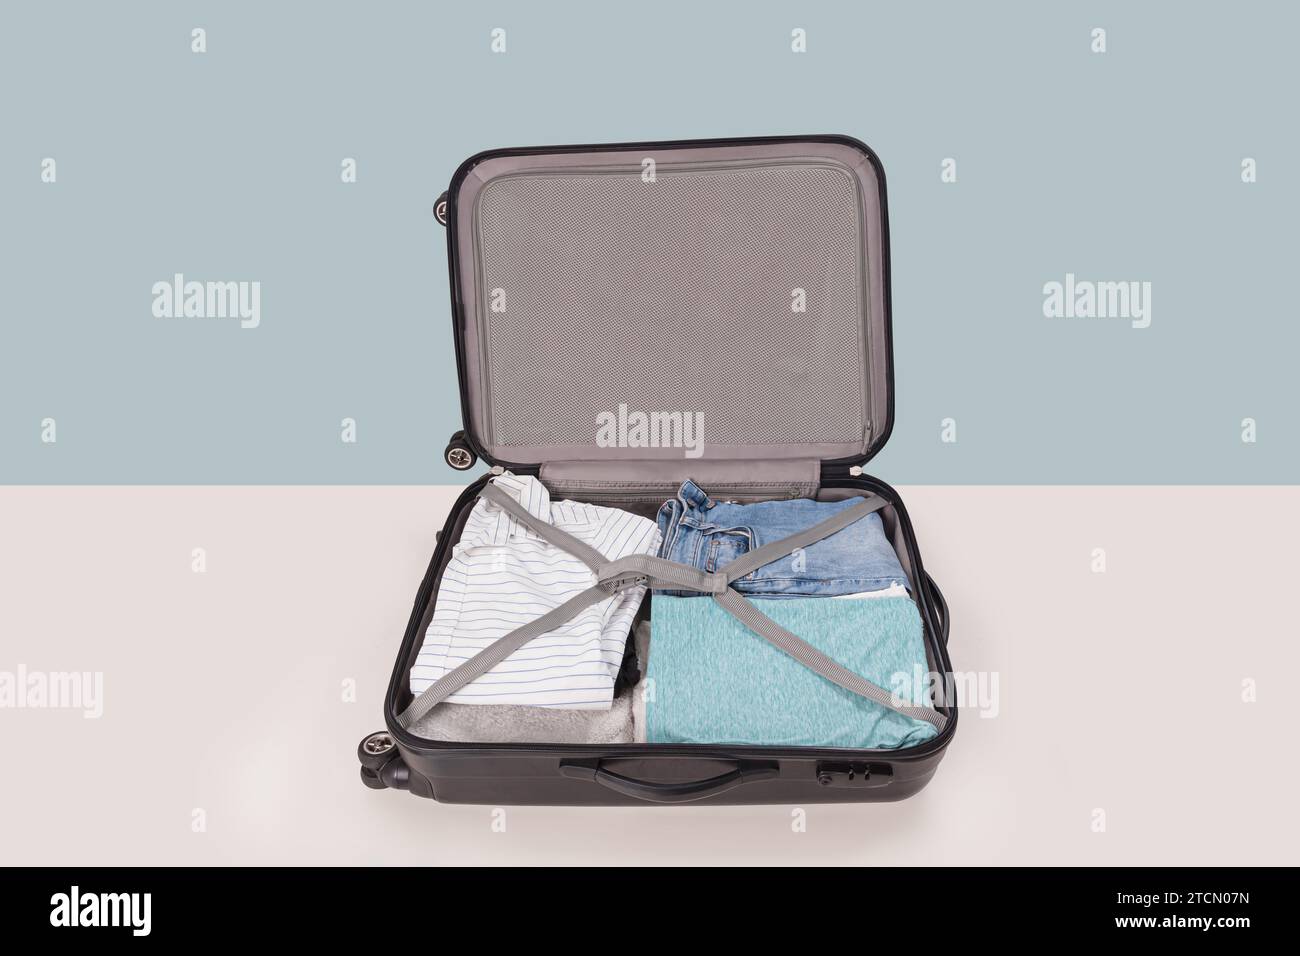 Open suitcase packed for trip isolated on light blue background Stock Photo